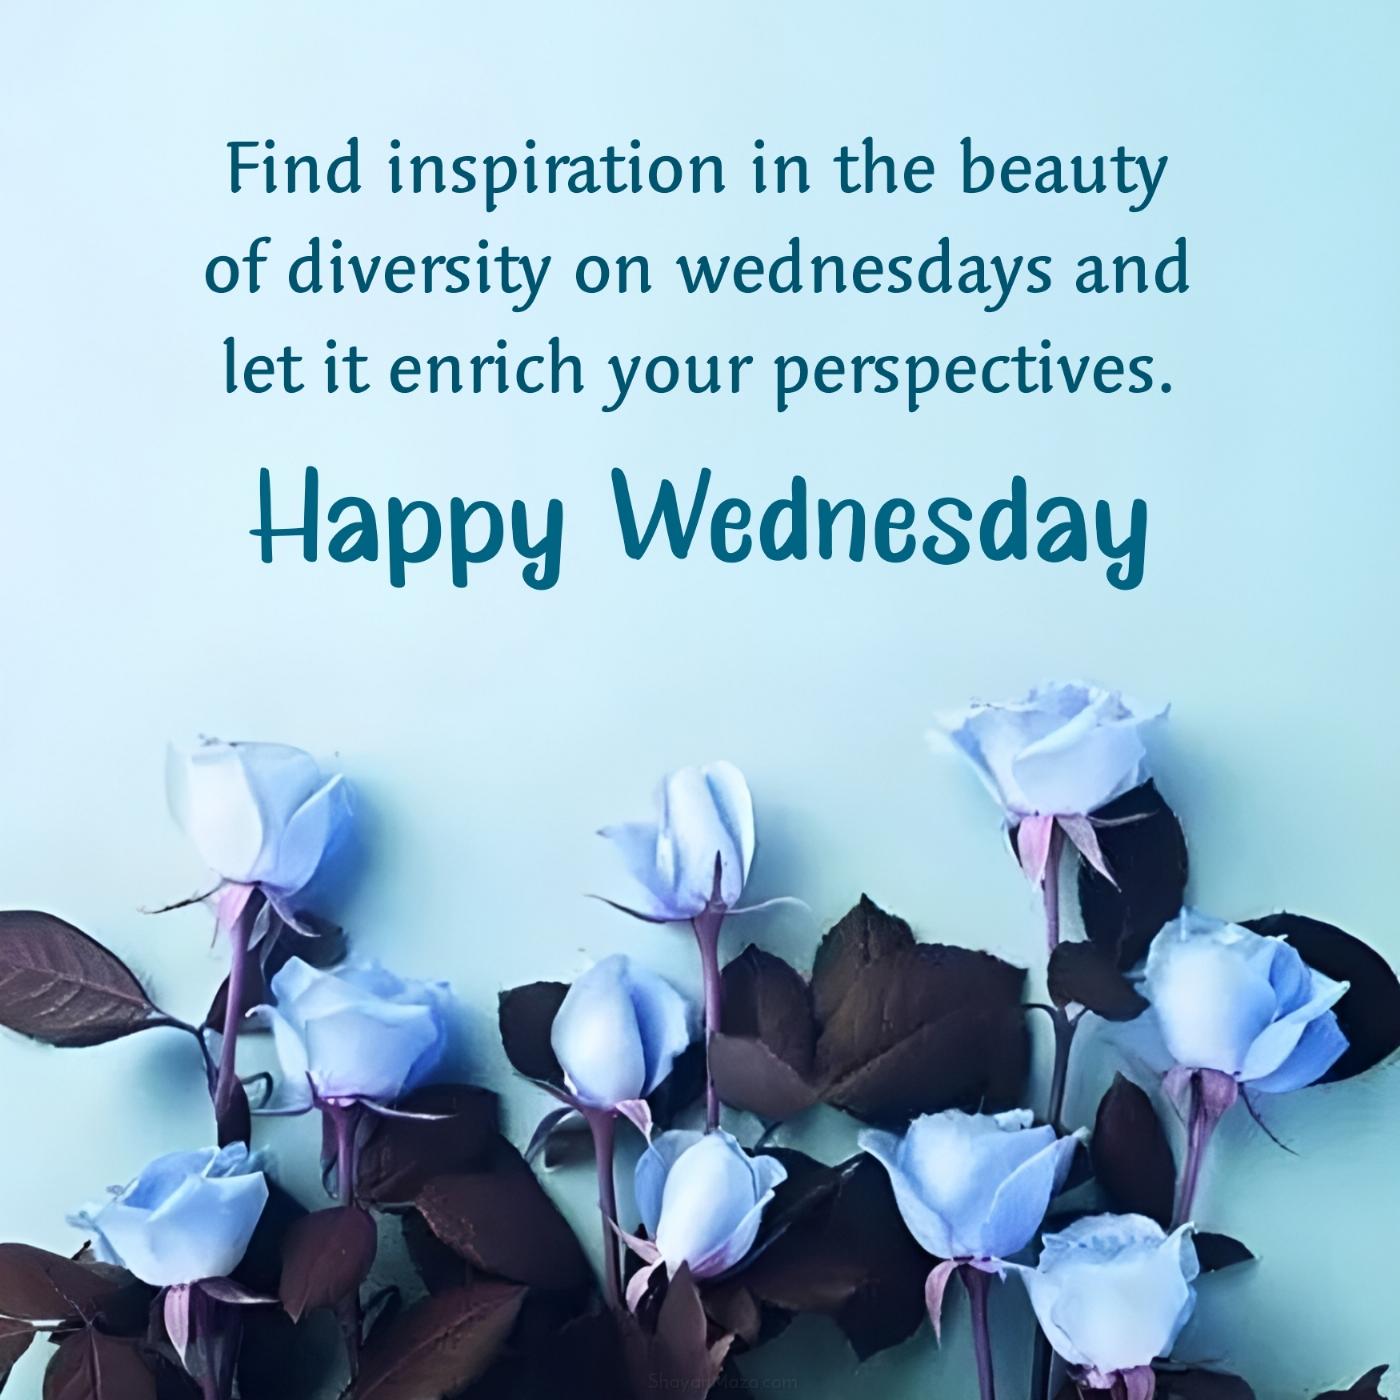 Find inspiration in the beauty of diversity on wednesdays